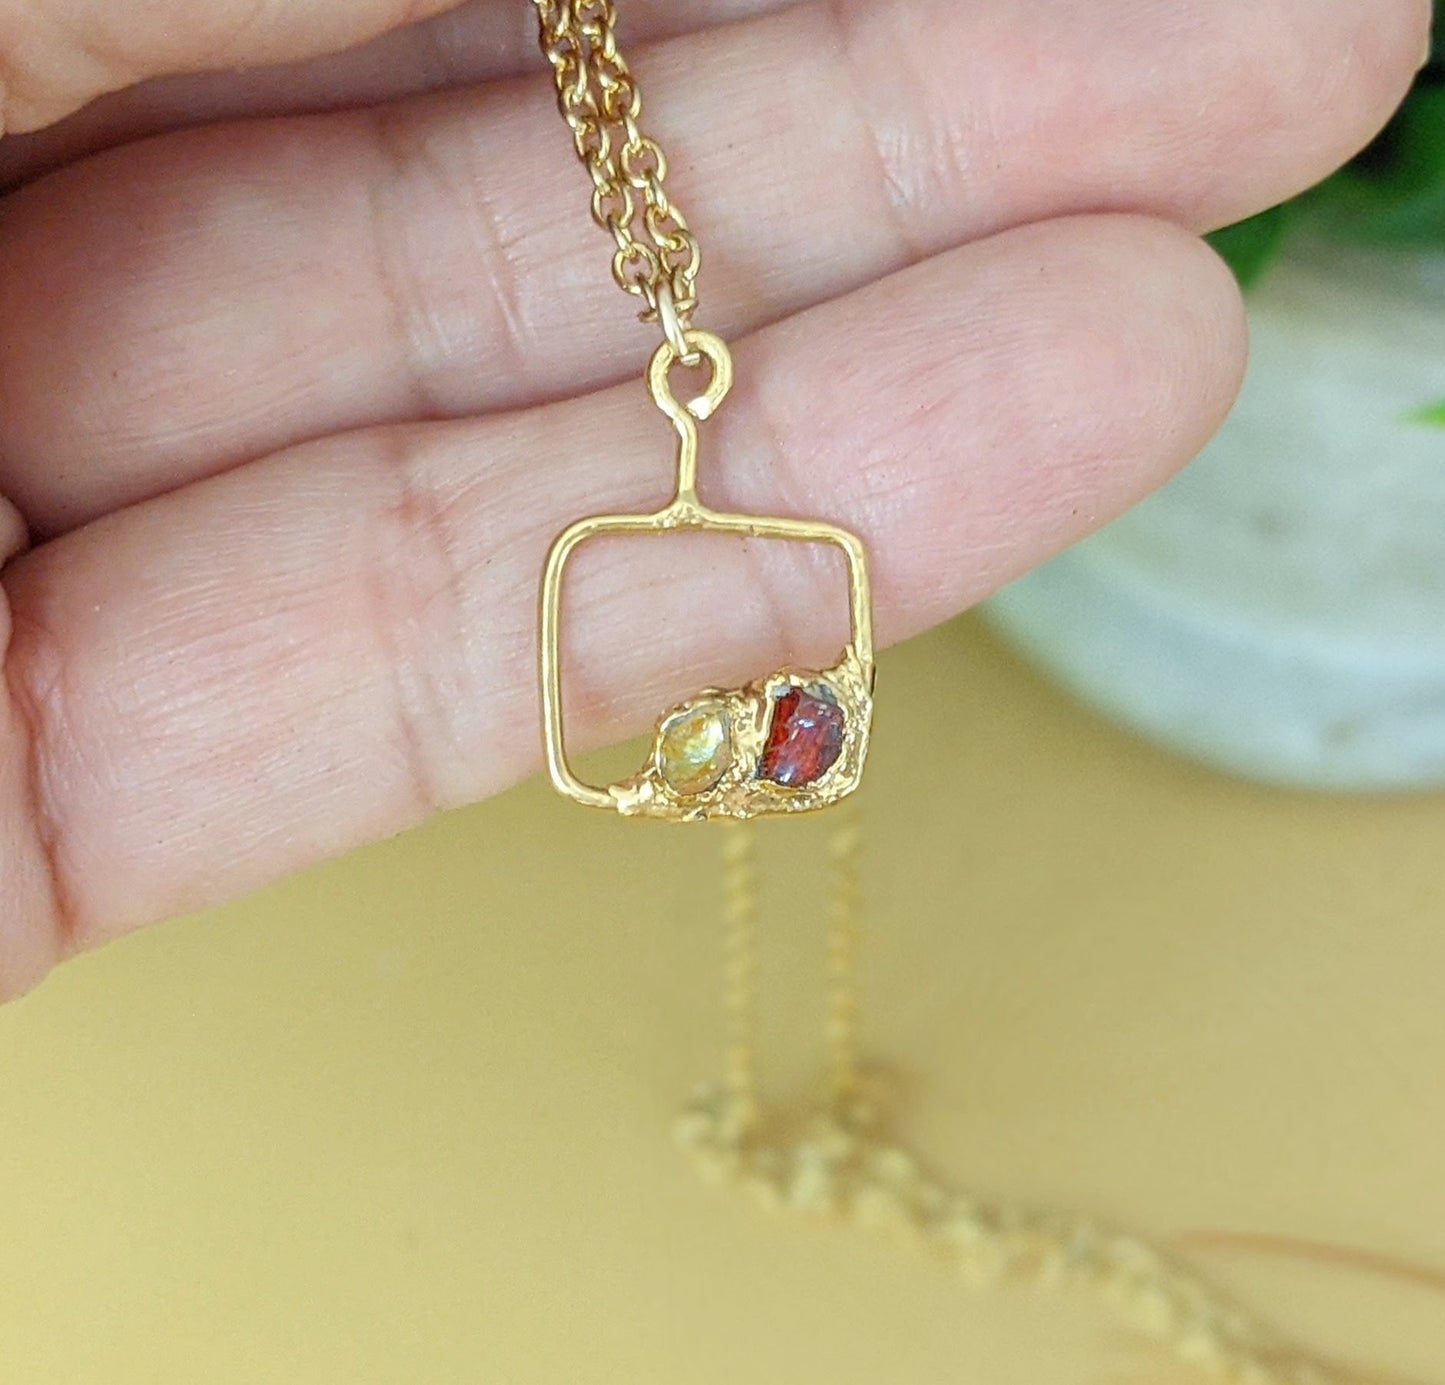 Birthstone necklace gold chain natural stone gem gift May Peridot | eBay